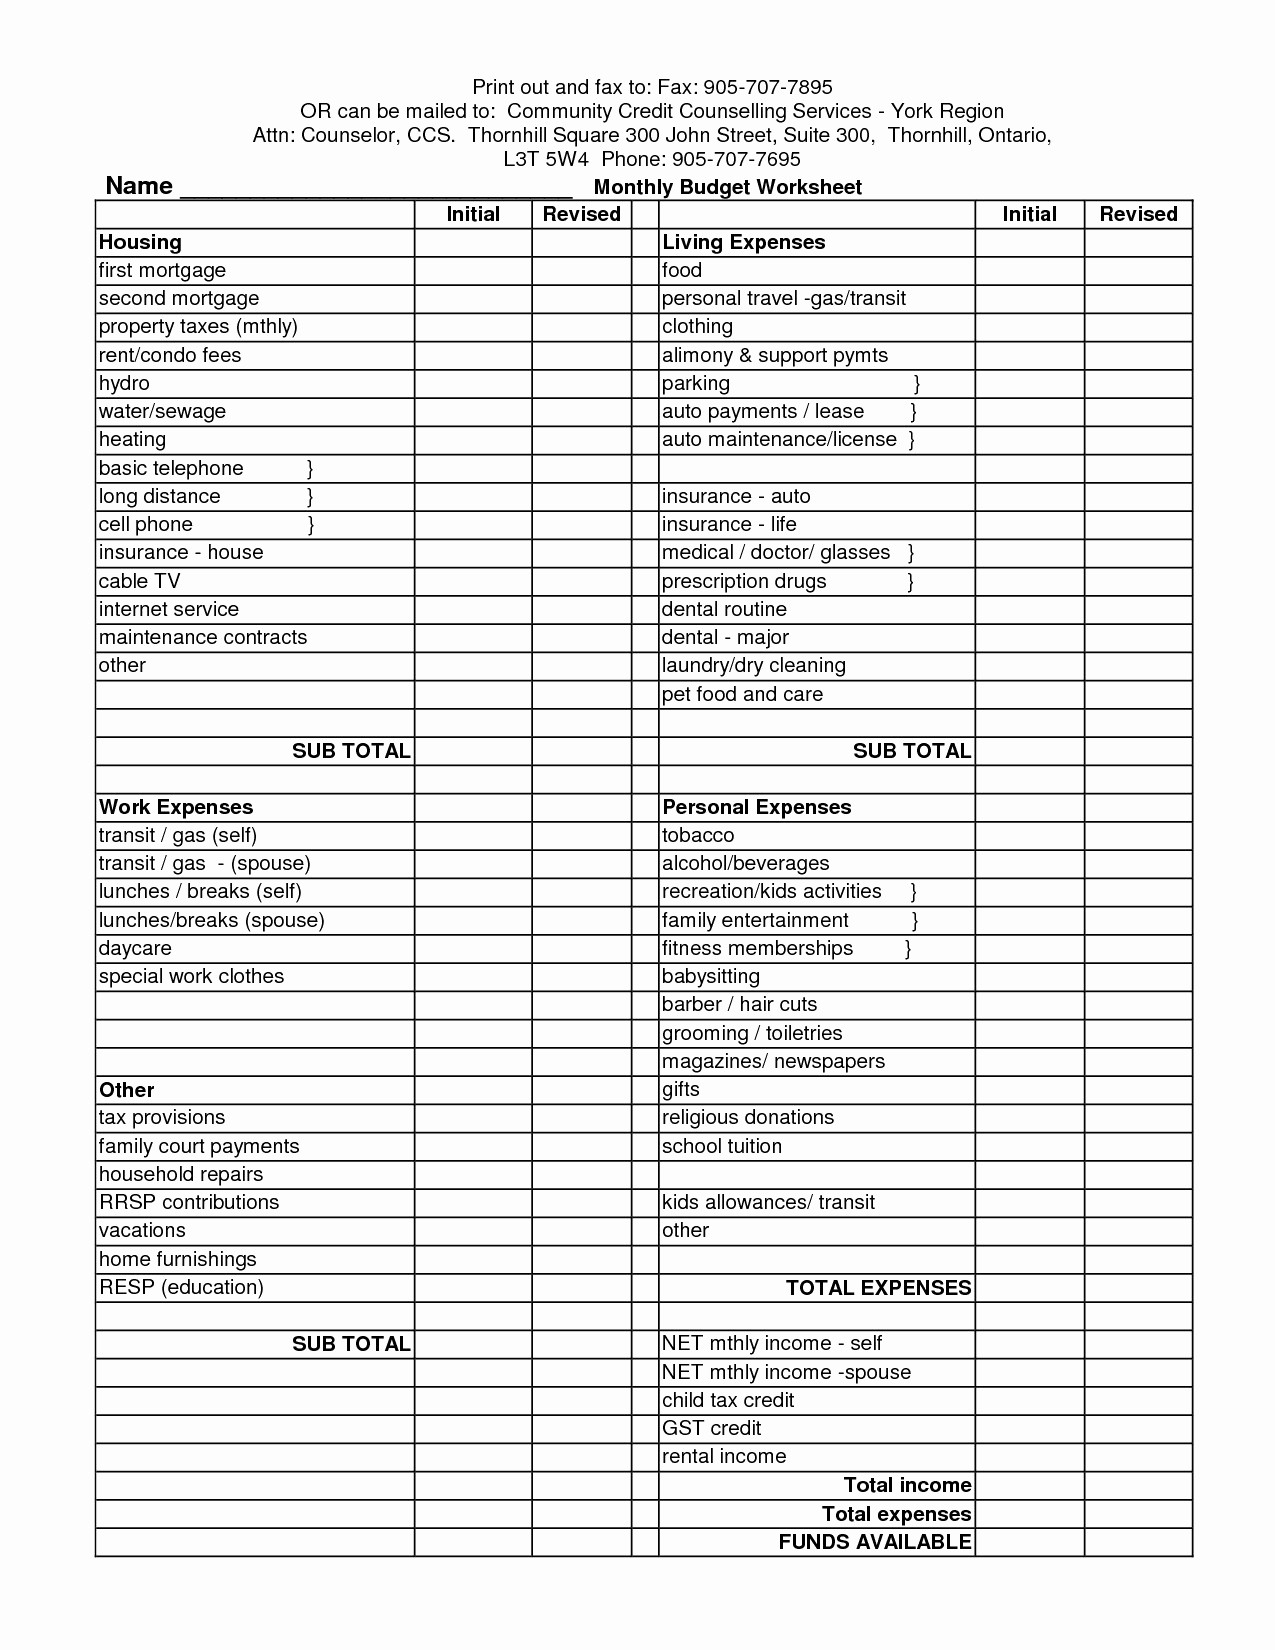 How to Prepare Expense Reports Fresh School Bud Worksheet Template Best How to Make A